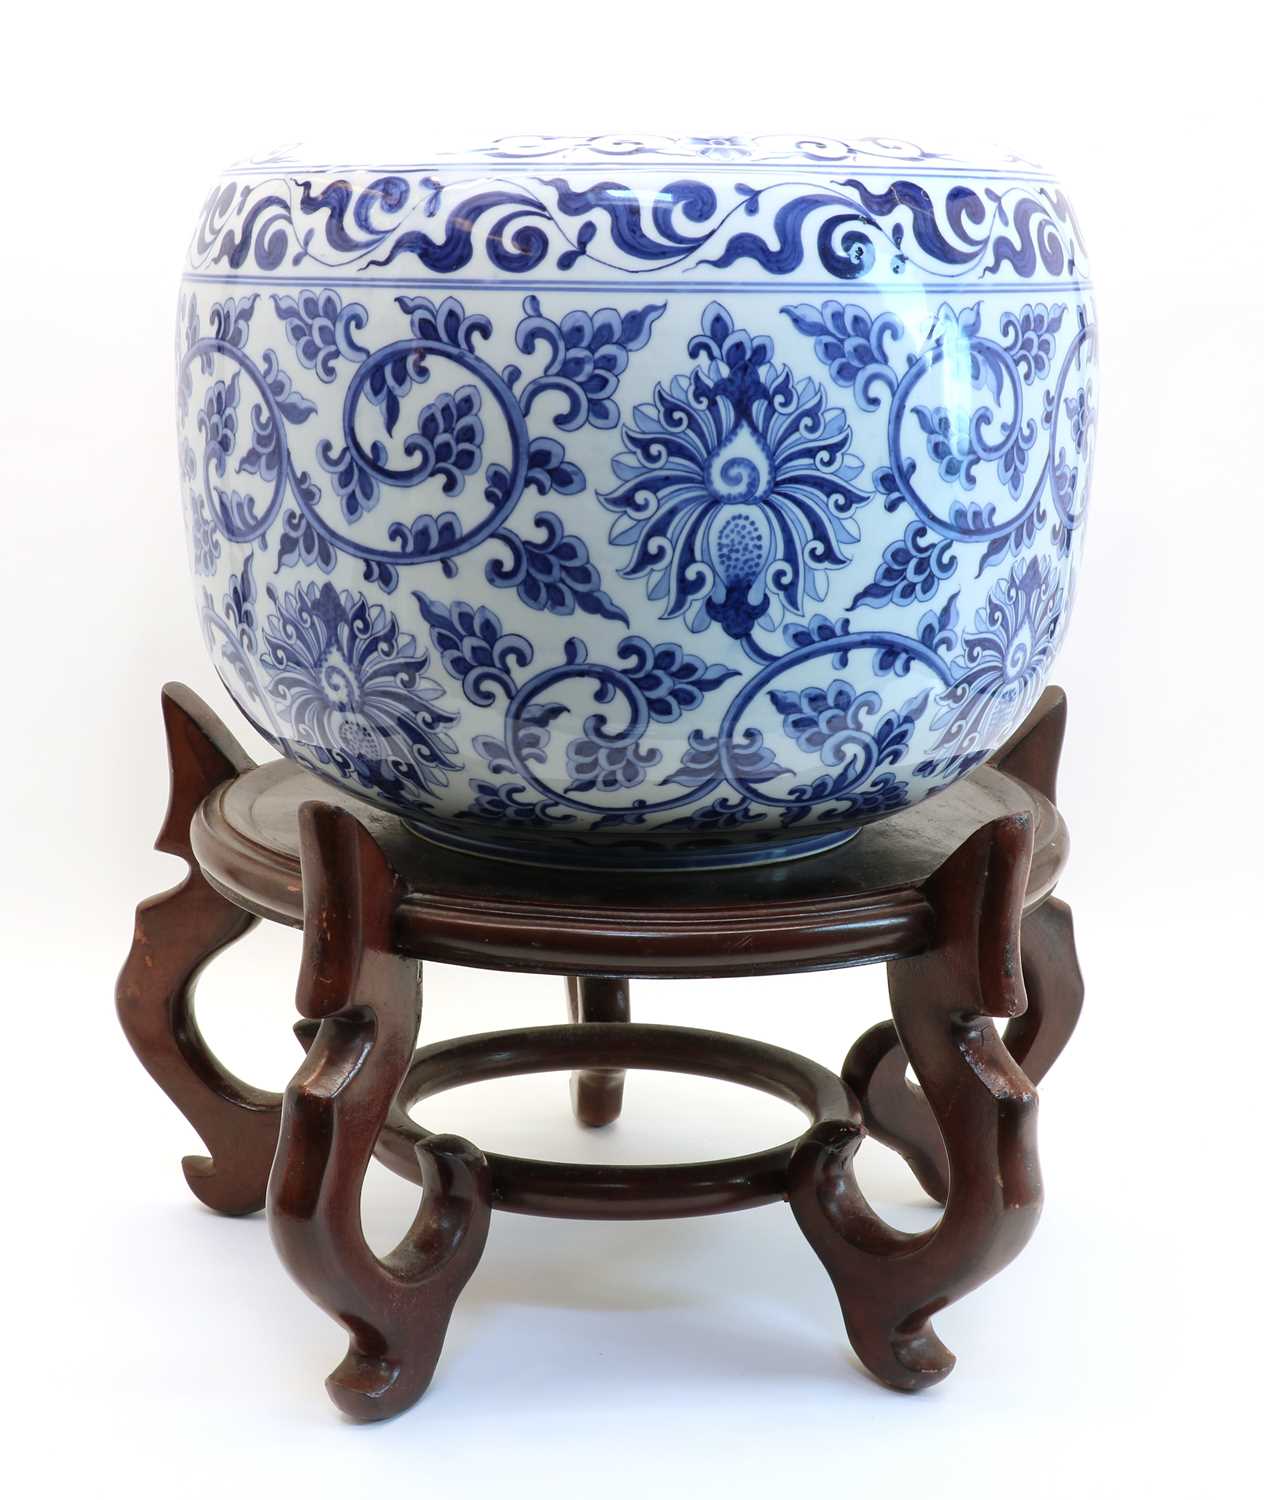 Lot 87 - A Chinese blue and white porcelain jardinière